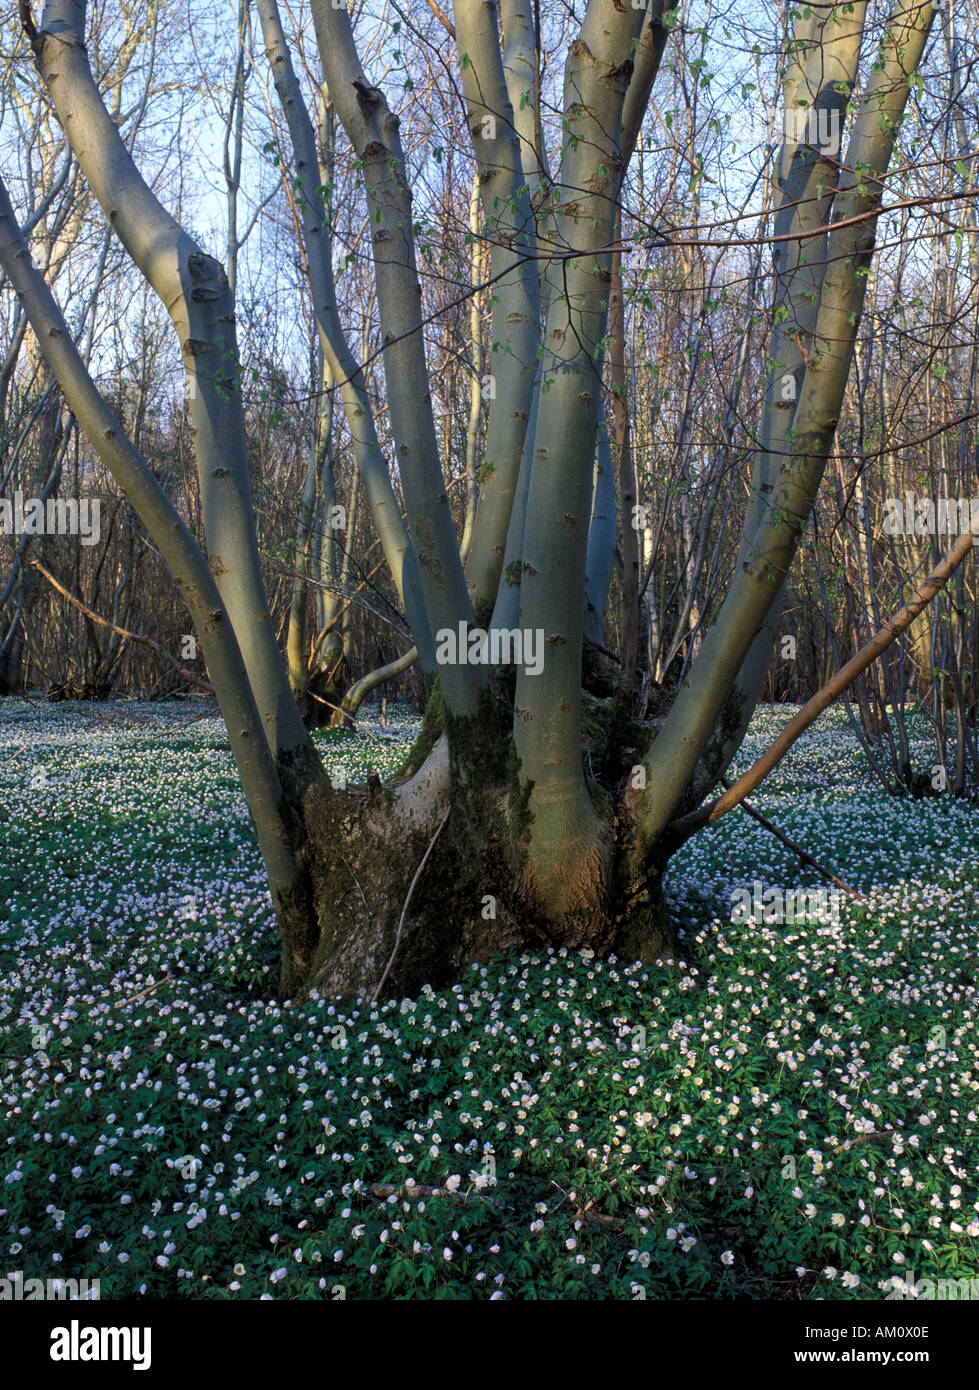 Coppiced Ash Tree (Fraxinus excelsior) with Wood Anemone sward, Garretts' Woods, Essex, UK Stock Photo